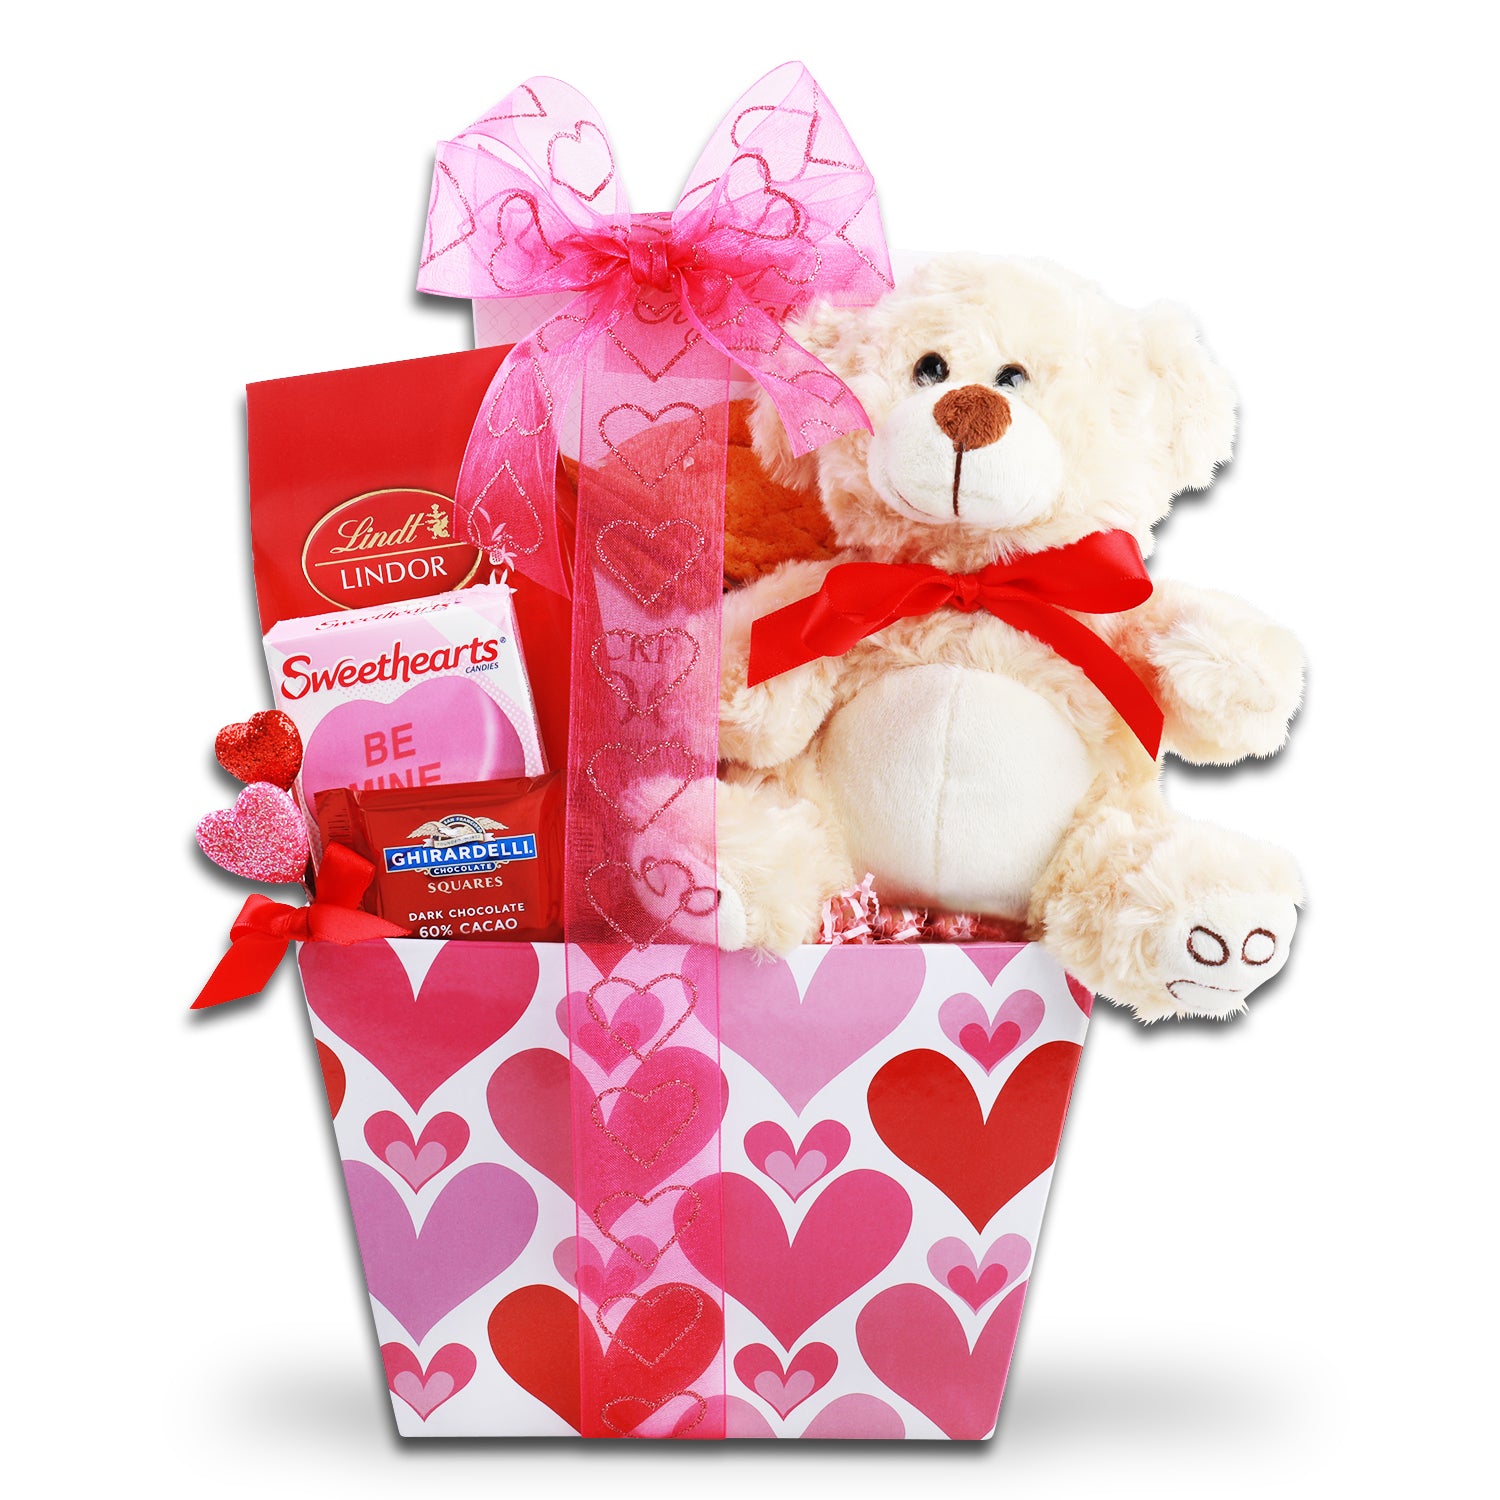 Gift basket iwth contents displayed. Include light tan plush bear and pink heart ribbon